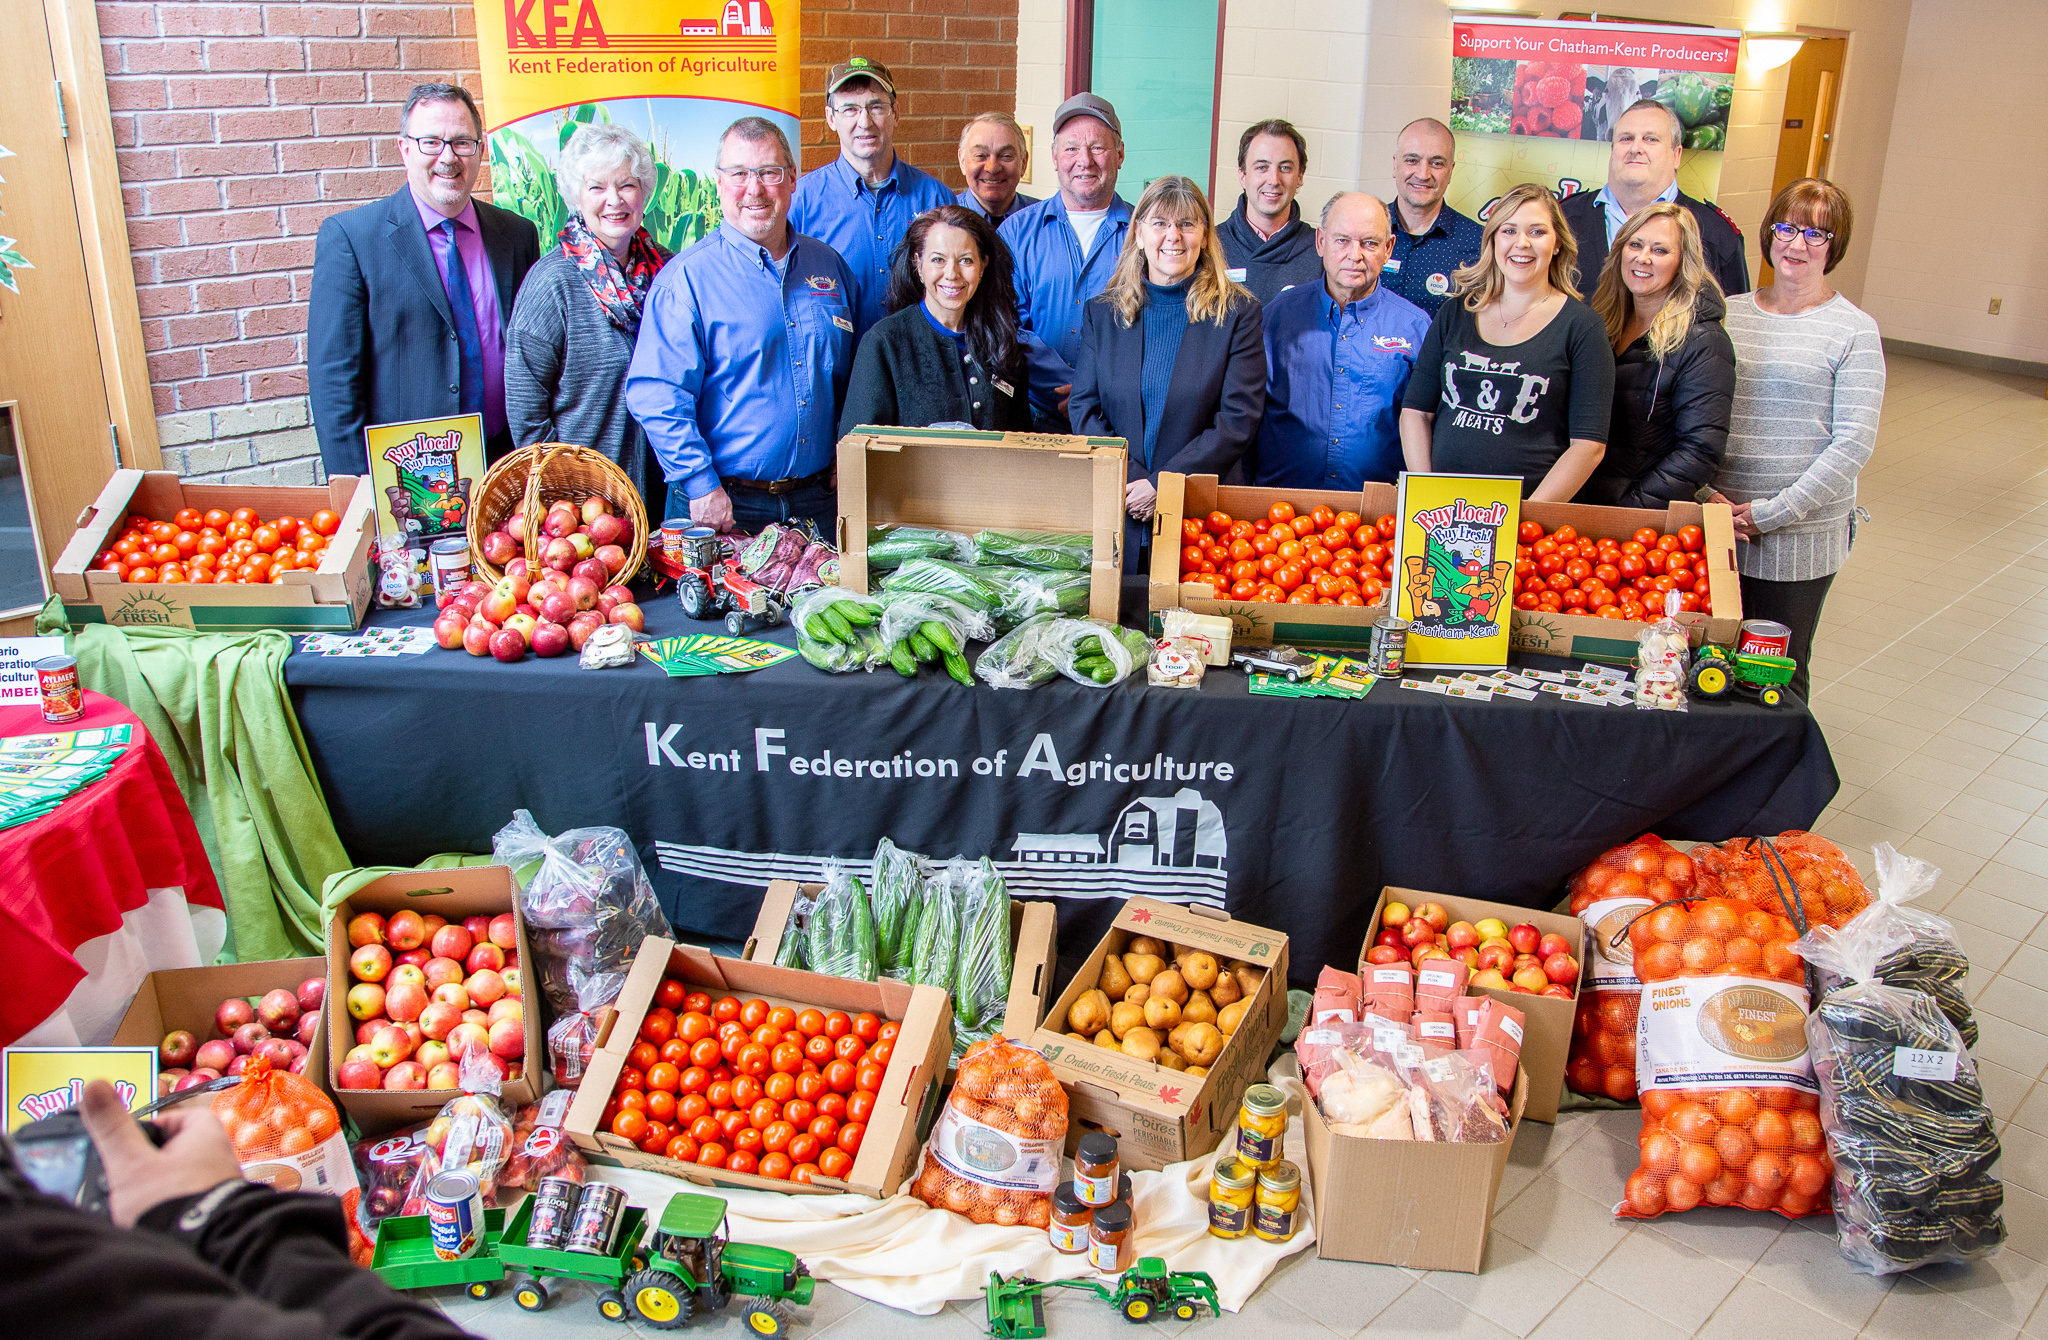 Kent Federation of Agriculture, Outreach For Hunger, and the Salvation Army